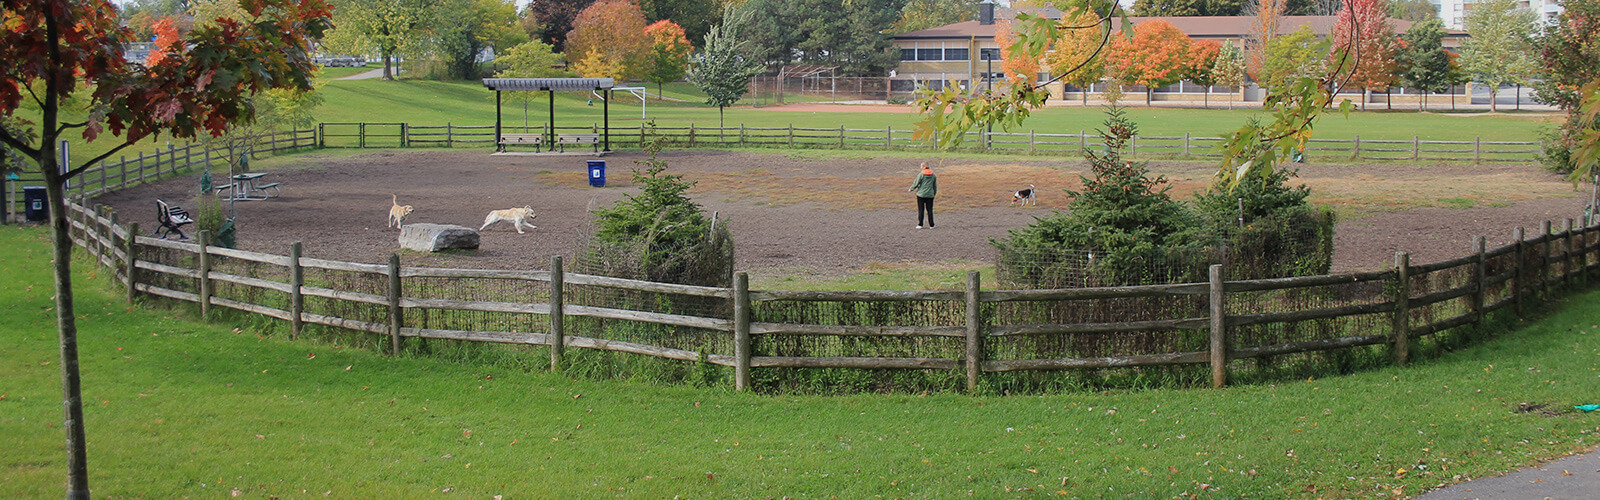 A fenced off-leash dog park surrounded by a maintained green lawn. Several dogs running around inside and a person keeping watch. Beyond that, is a baseball diamond and school yard. Lush fall trees and greenery are scattered throughout.